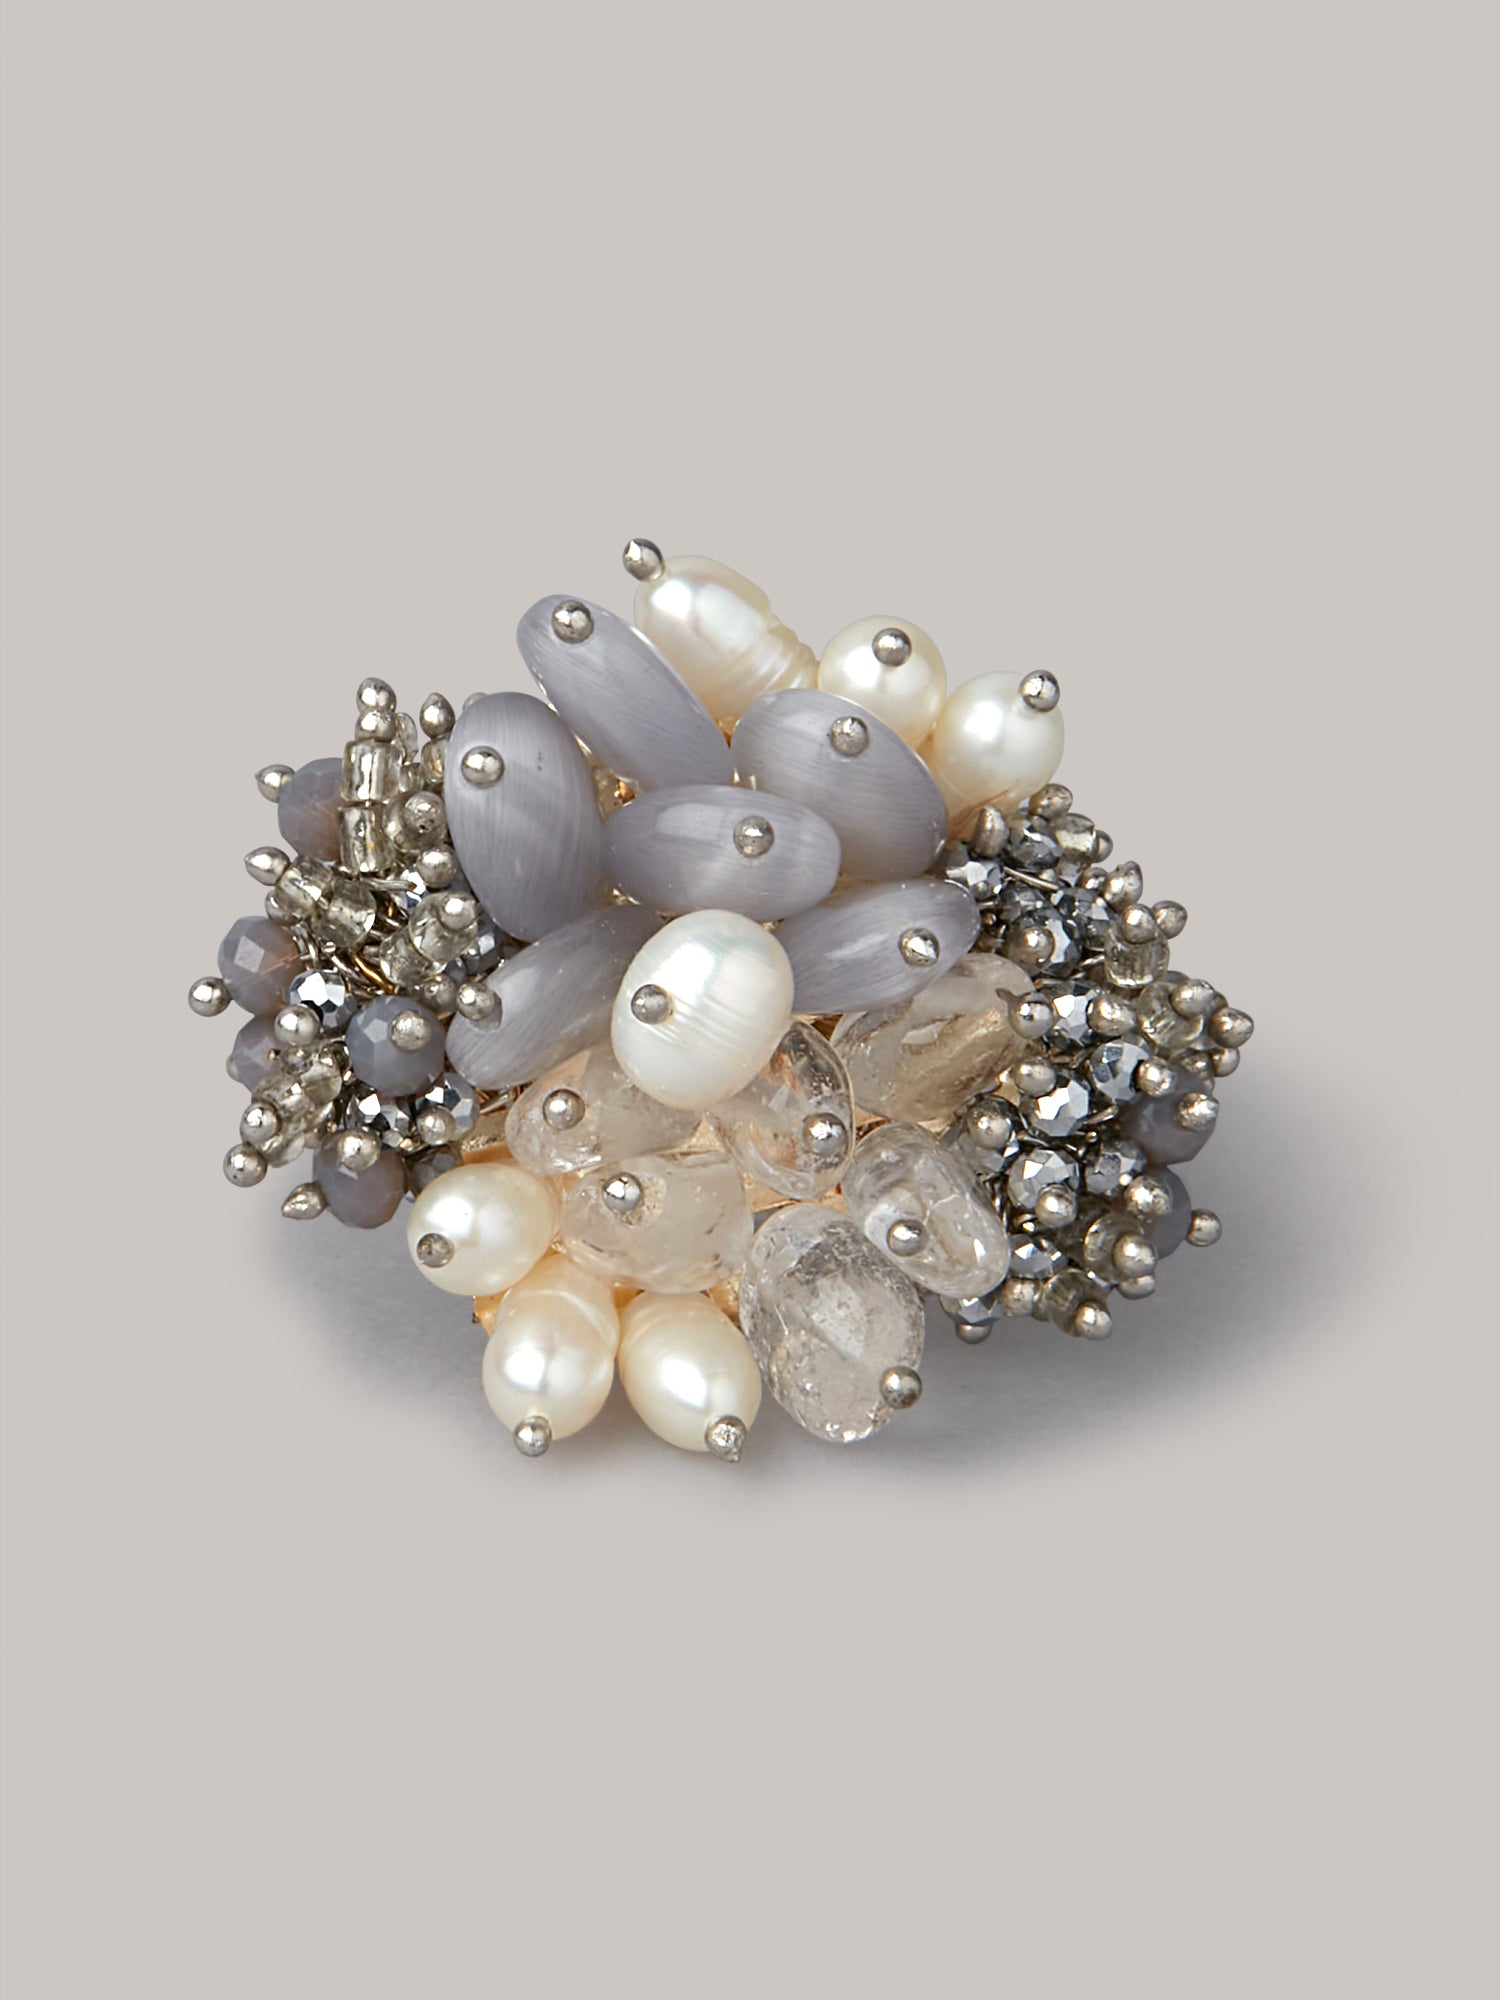 Amama,Designer Beaded Bracelet With Pearls And Stone In Grey And Off-White